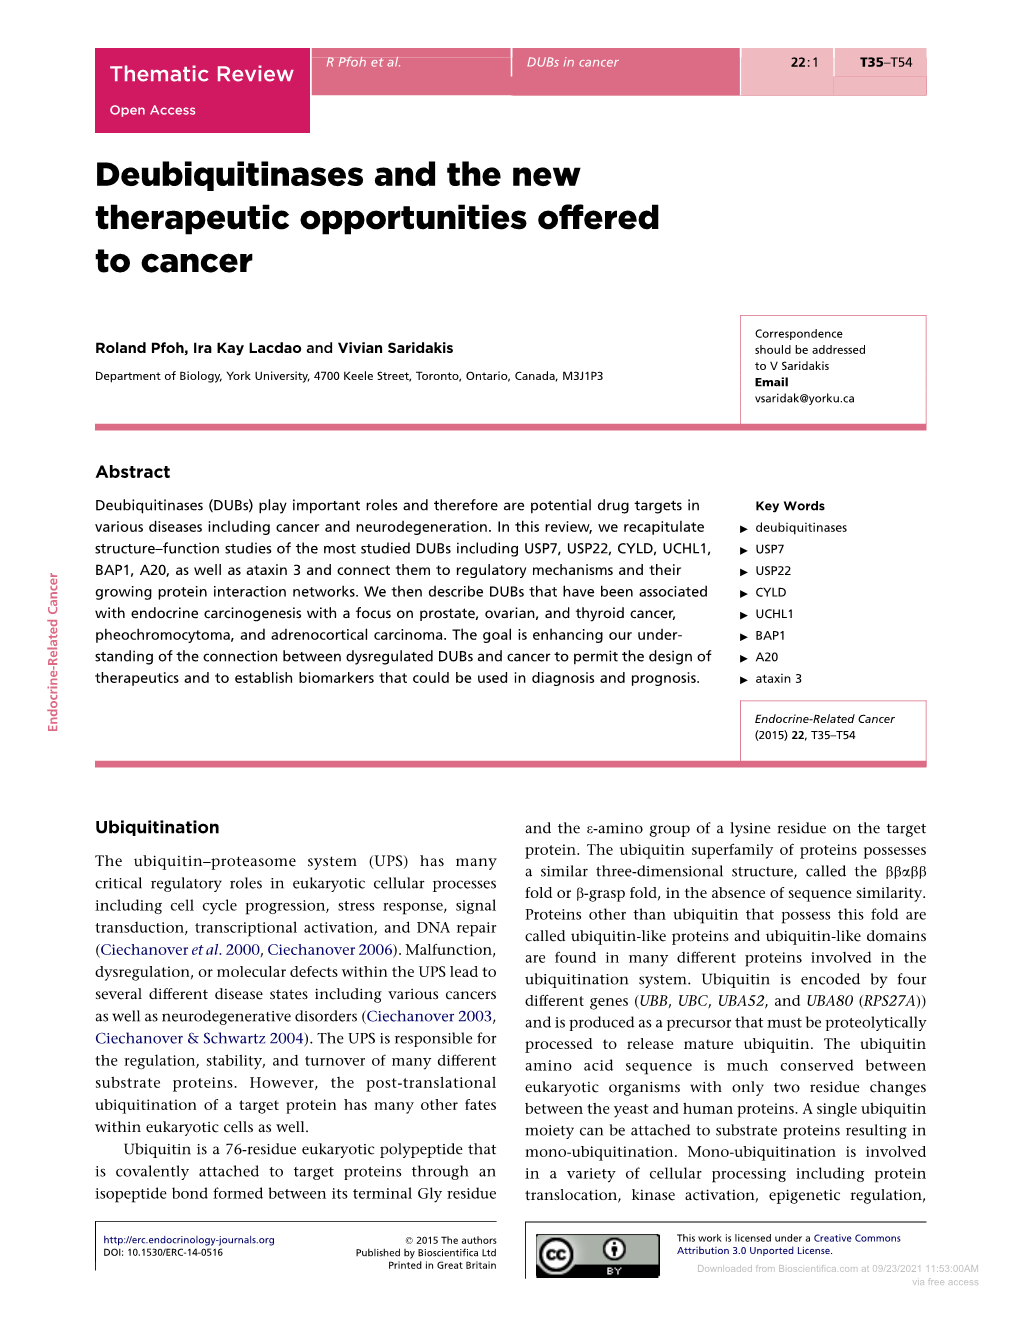 Deubiquitinases and the New Therapeutic Opportunities Offered to Cancer